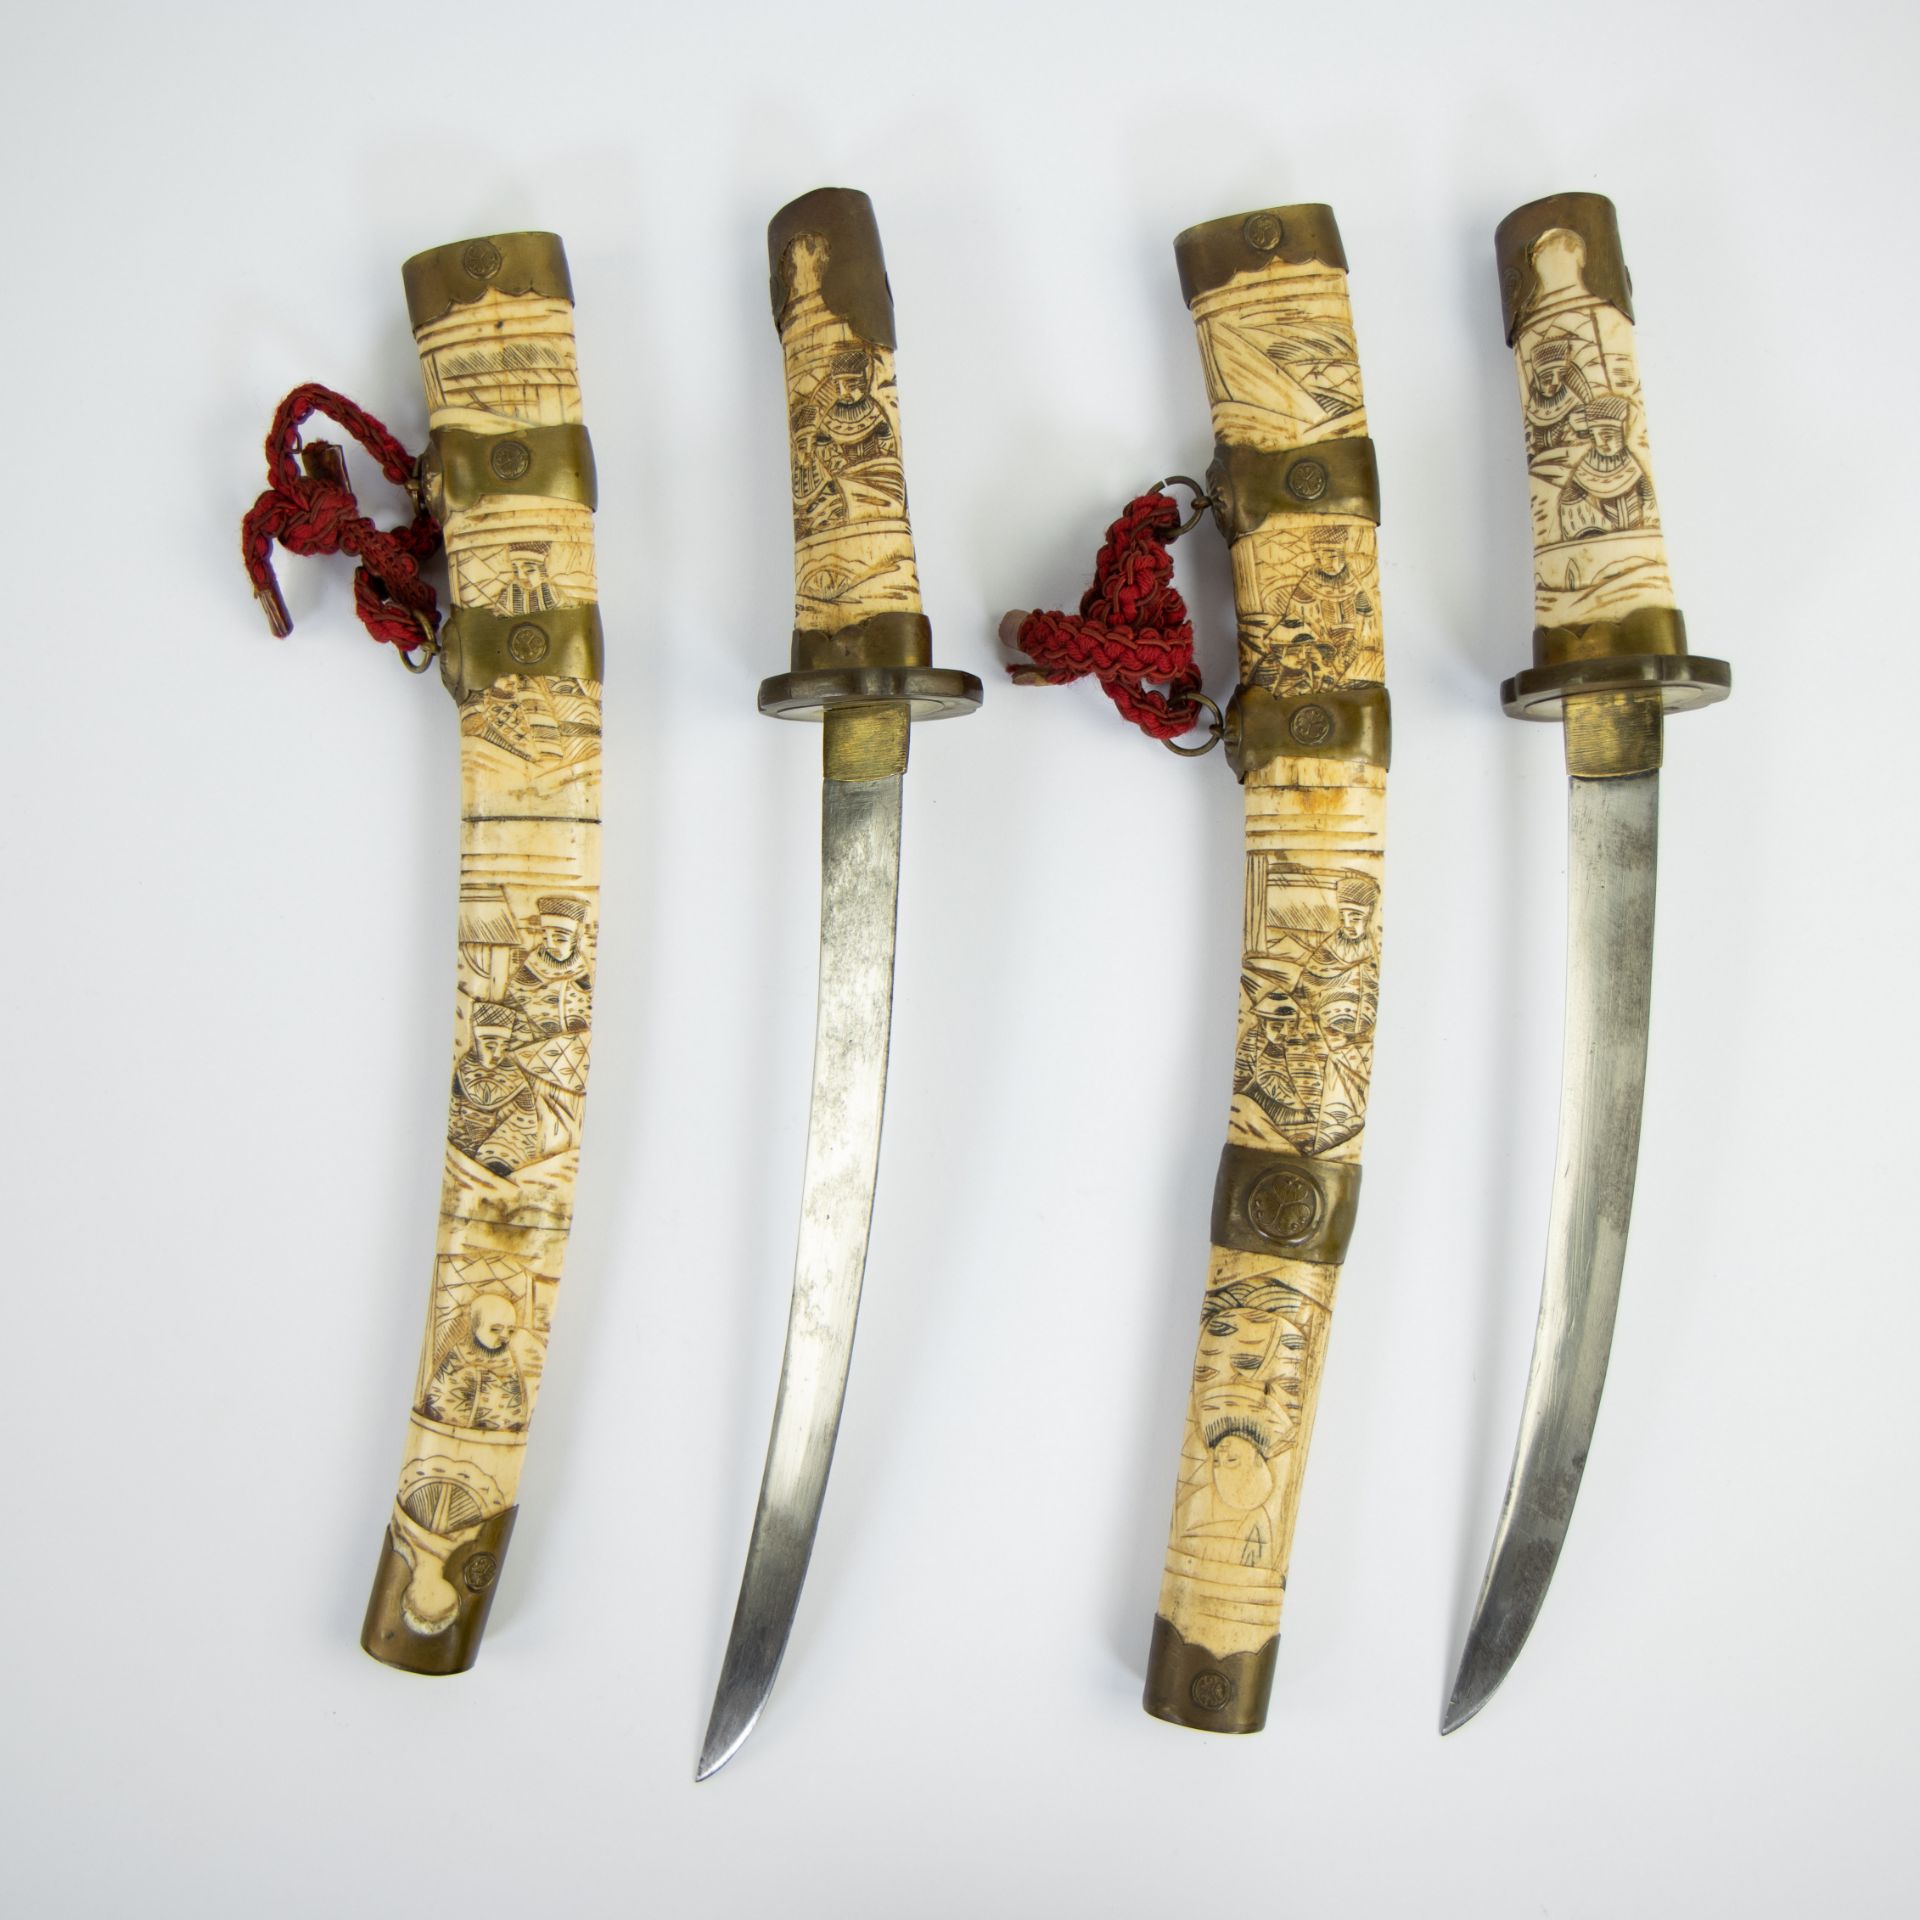 2 Japanese tanto knives with hilt and scabbard in finely sculpted bone, Meiji period - Image 2 of 2